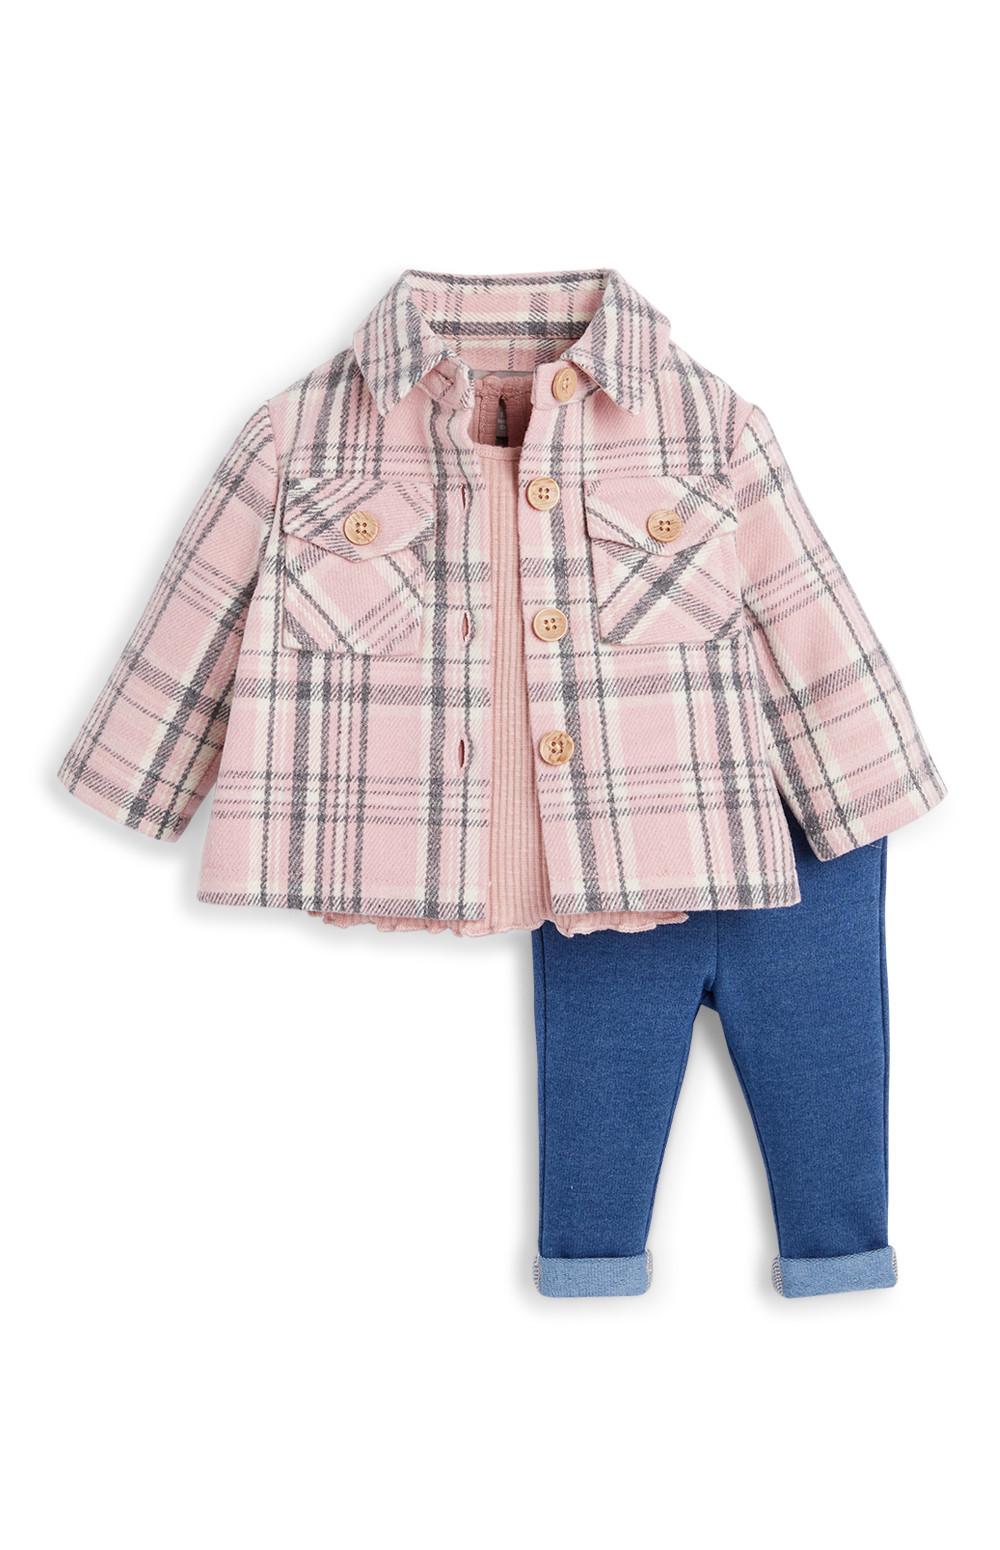 primark childrens clothes online shopping